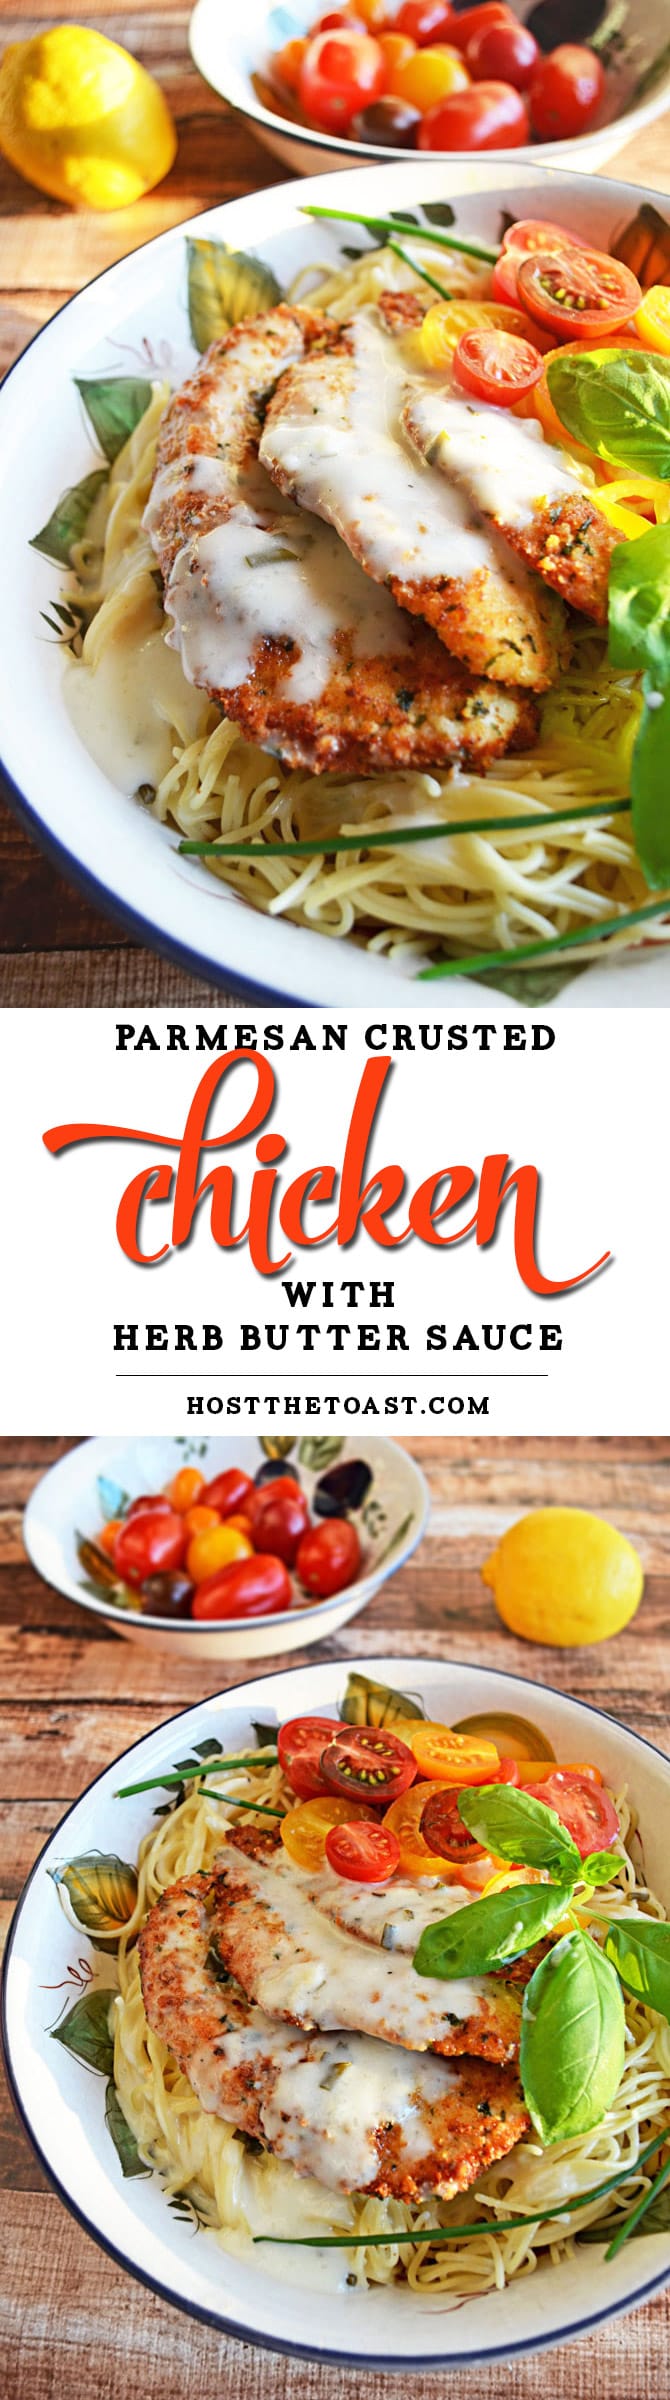 Parmesan Crusted Chicken with Herb Butter Sauce-- my most cooked recipe! Easy and impressive and oh so delicious.